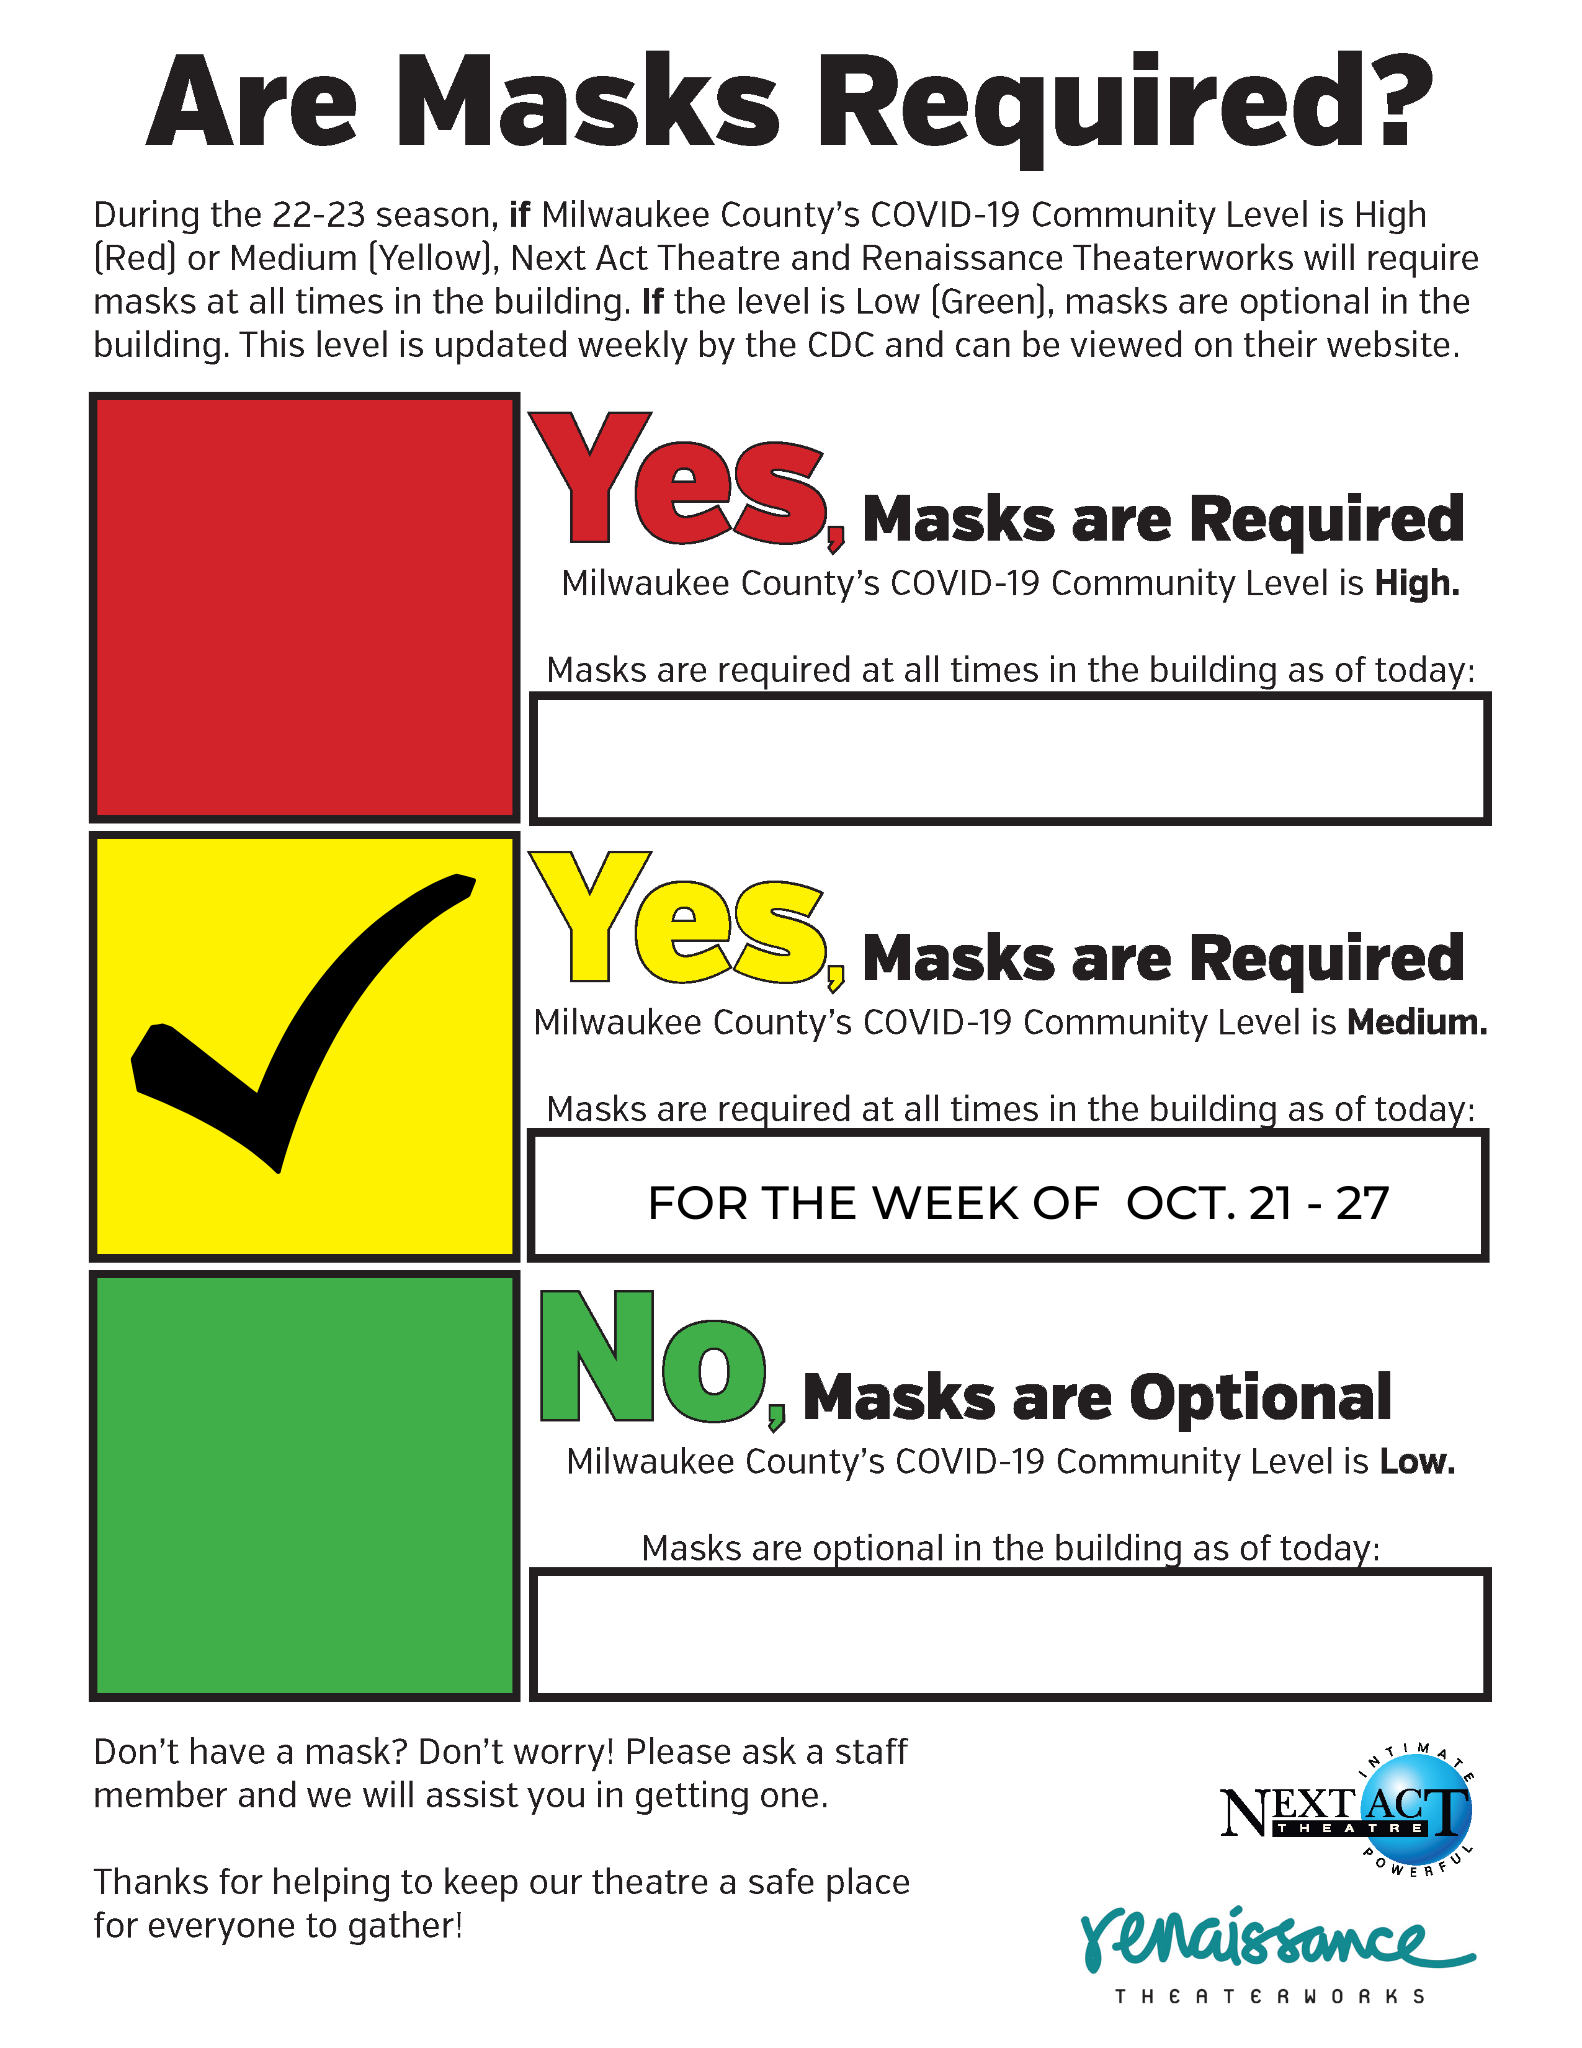 10-21 masks required COVID sign - levels